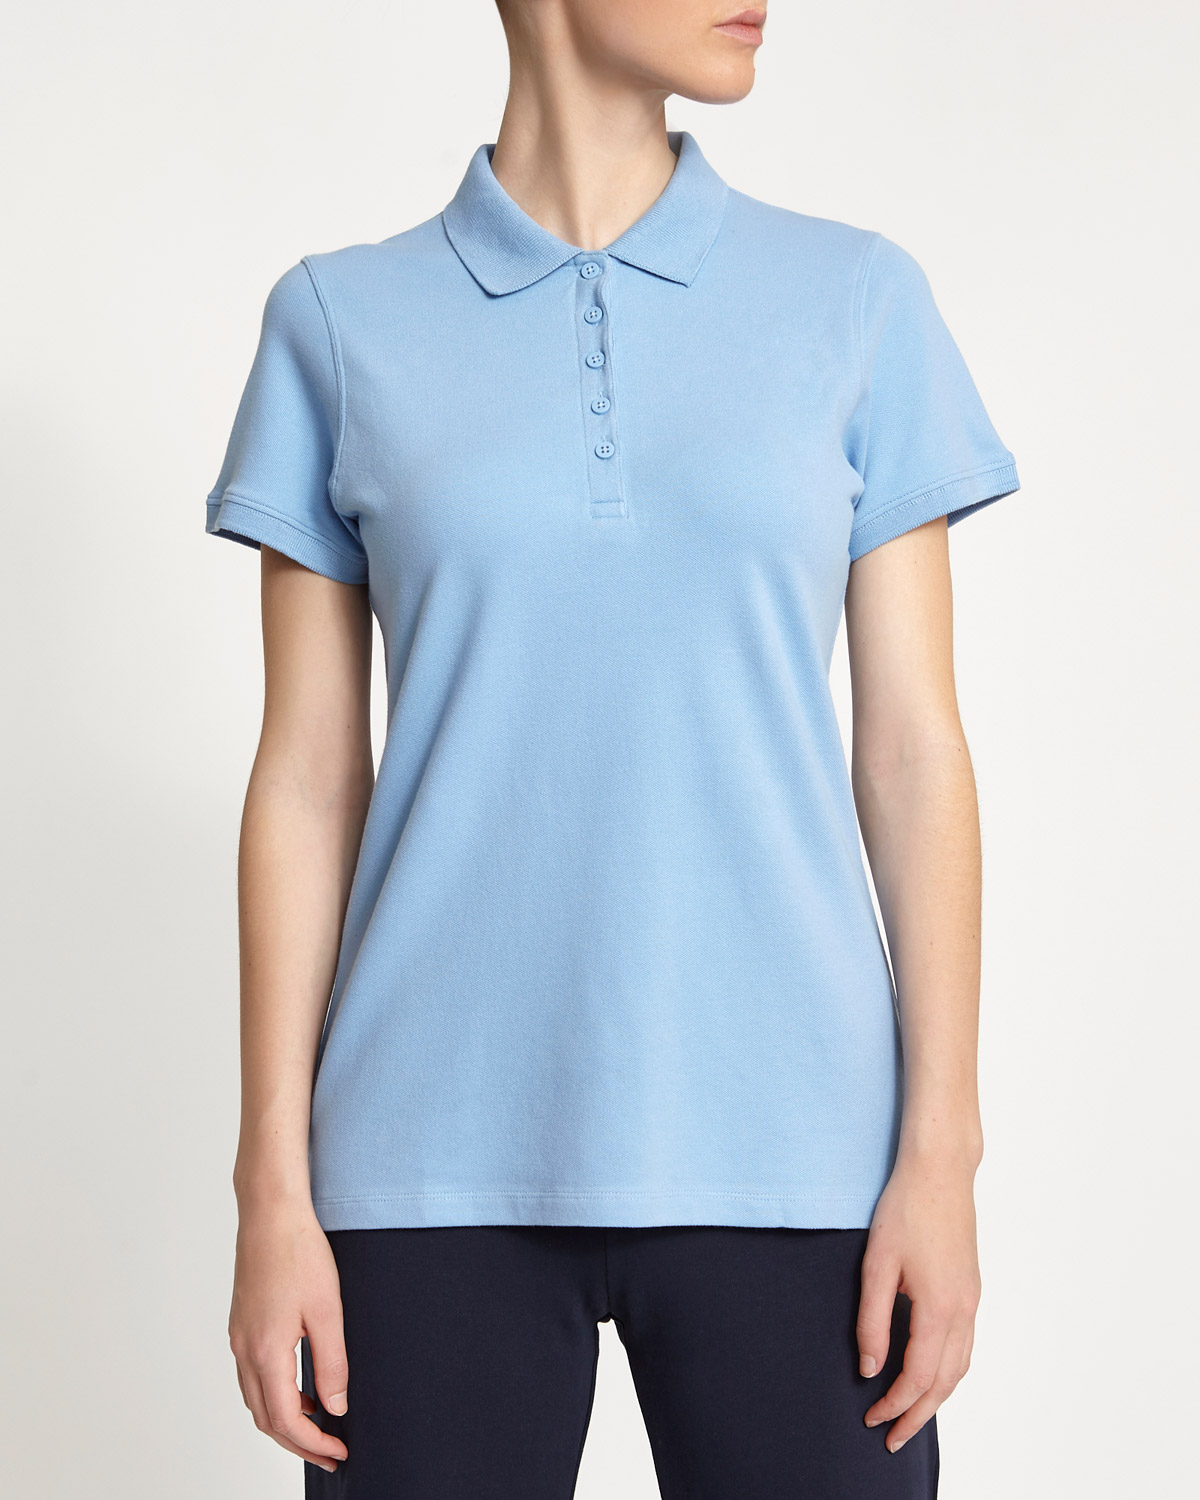 Go up Compliment Gym Dunnes Stores Women's Polo Shirts Sale, 58% OFF | gamblepetclinic.com